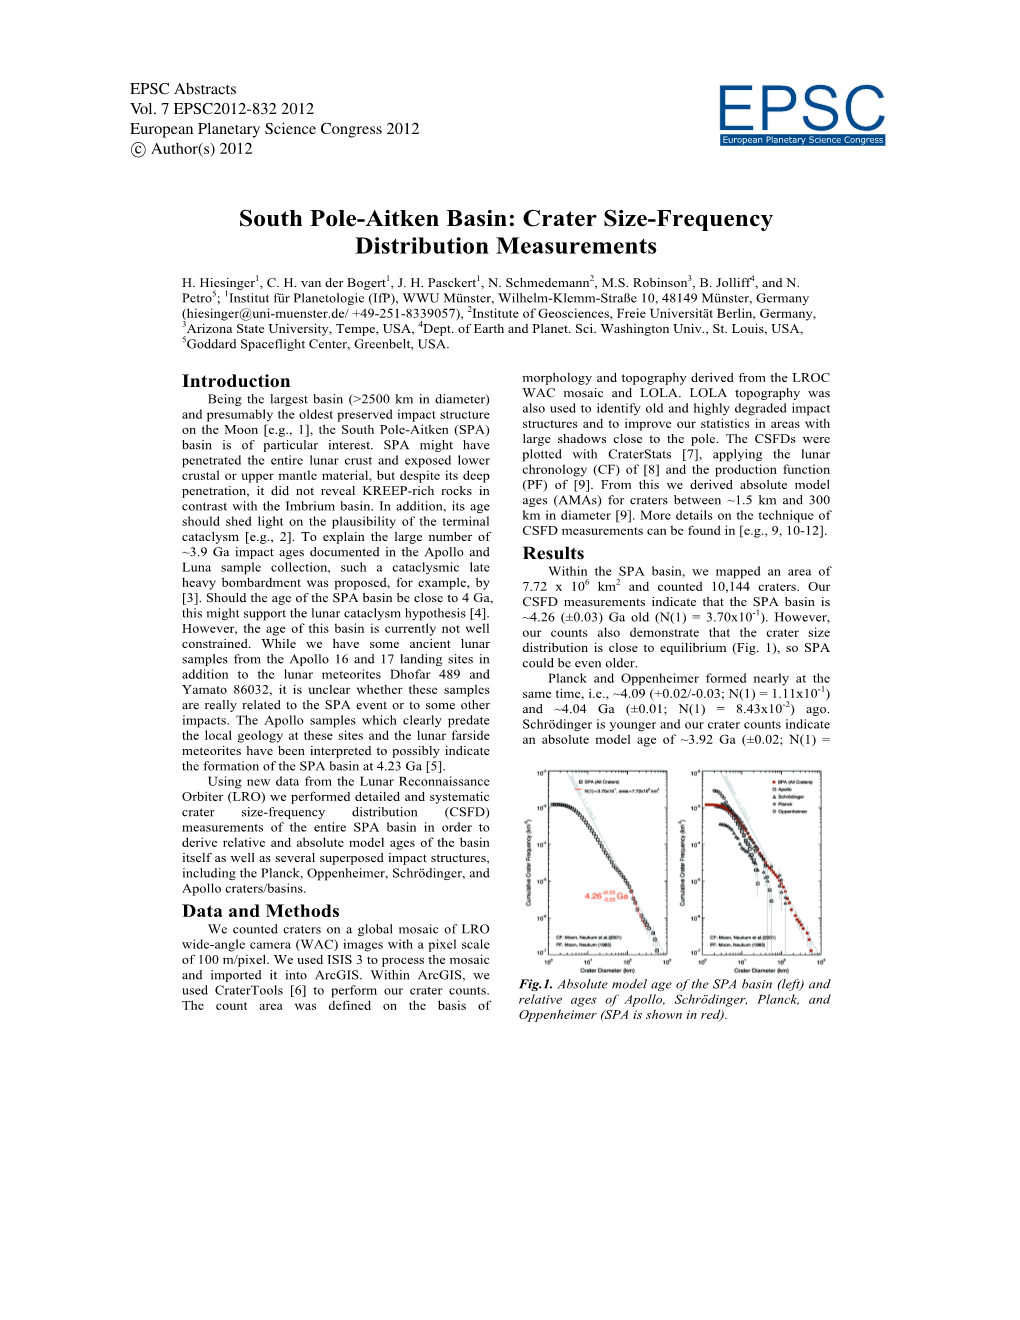 South Pole-Aitken Basin: Crater Size-Frequency Distribution Measurements